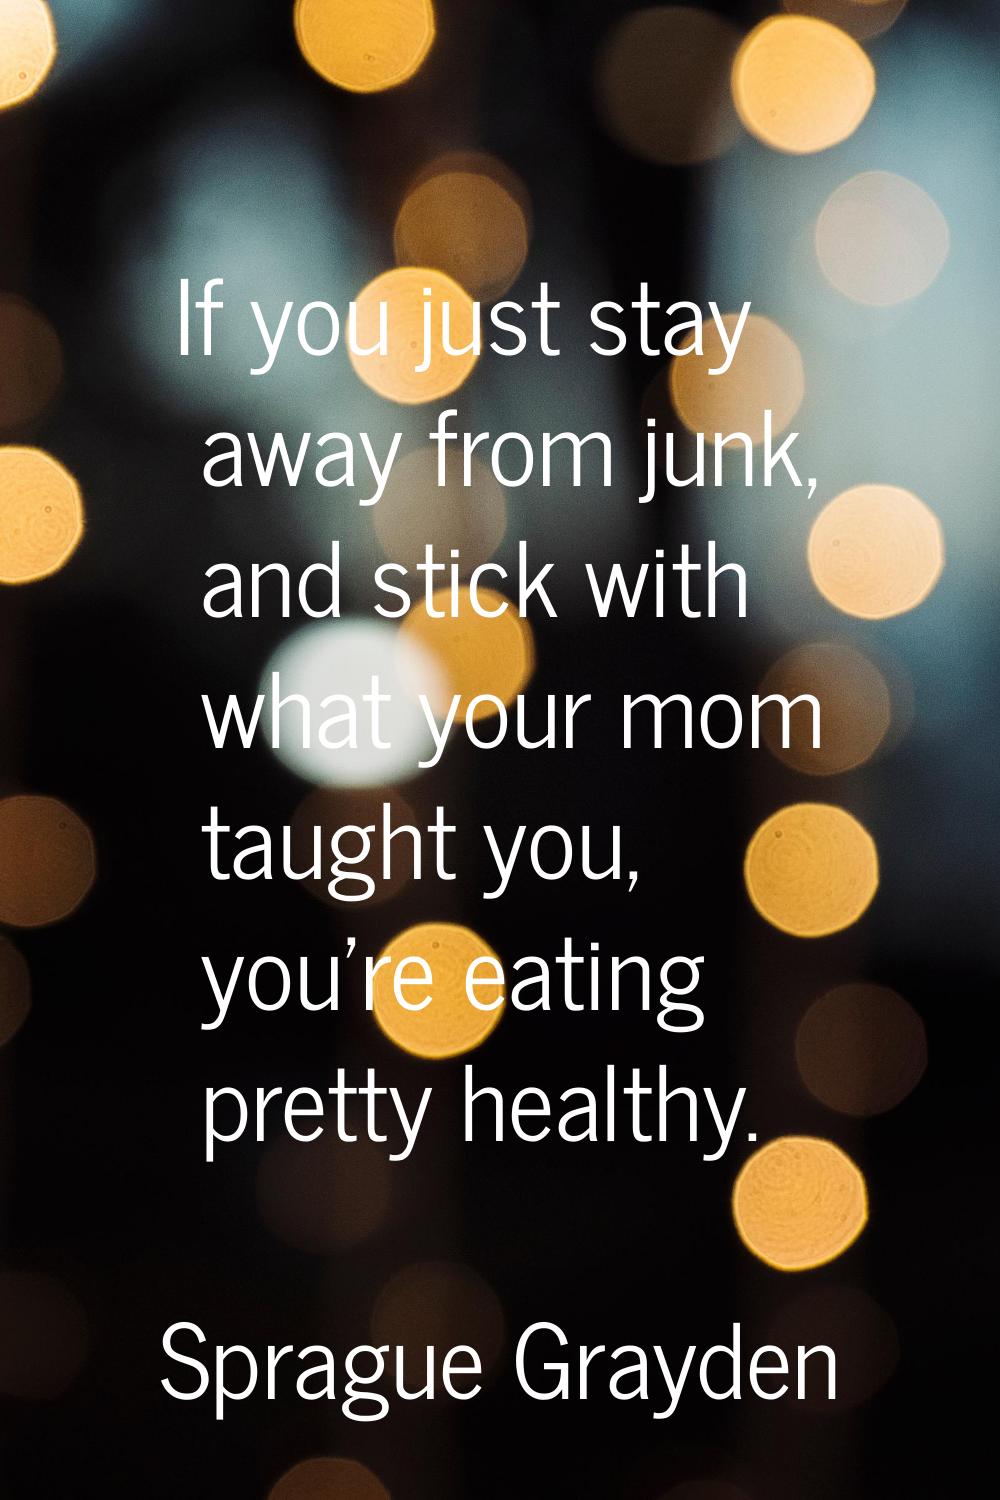 If you just stay away from junk, and stick with what your mom taught you, you're eating pretty heal